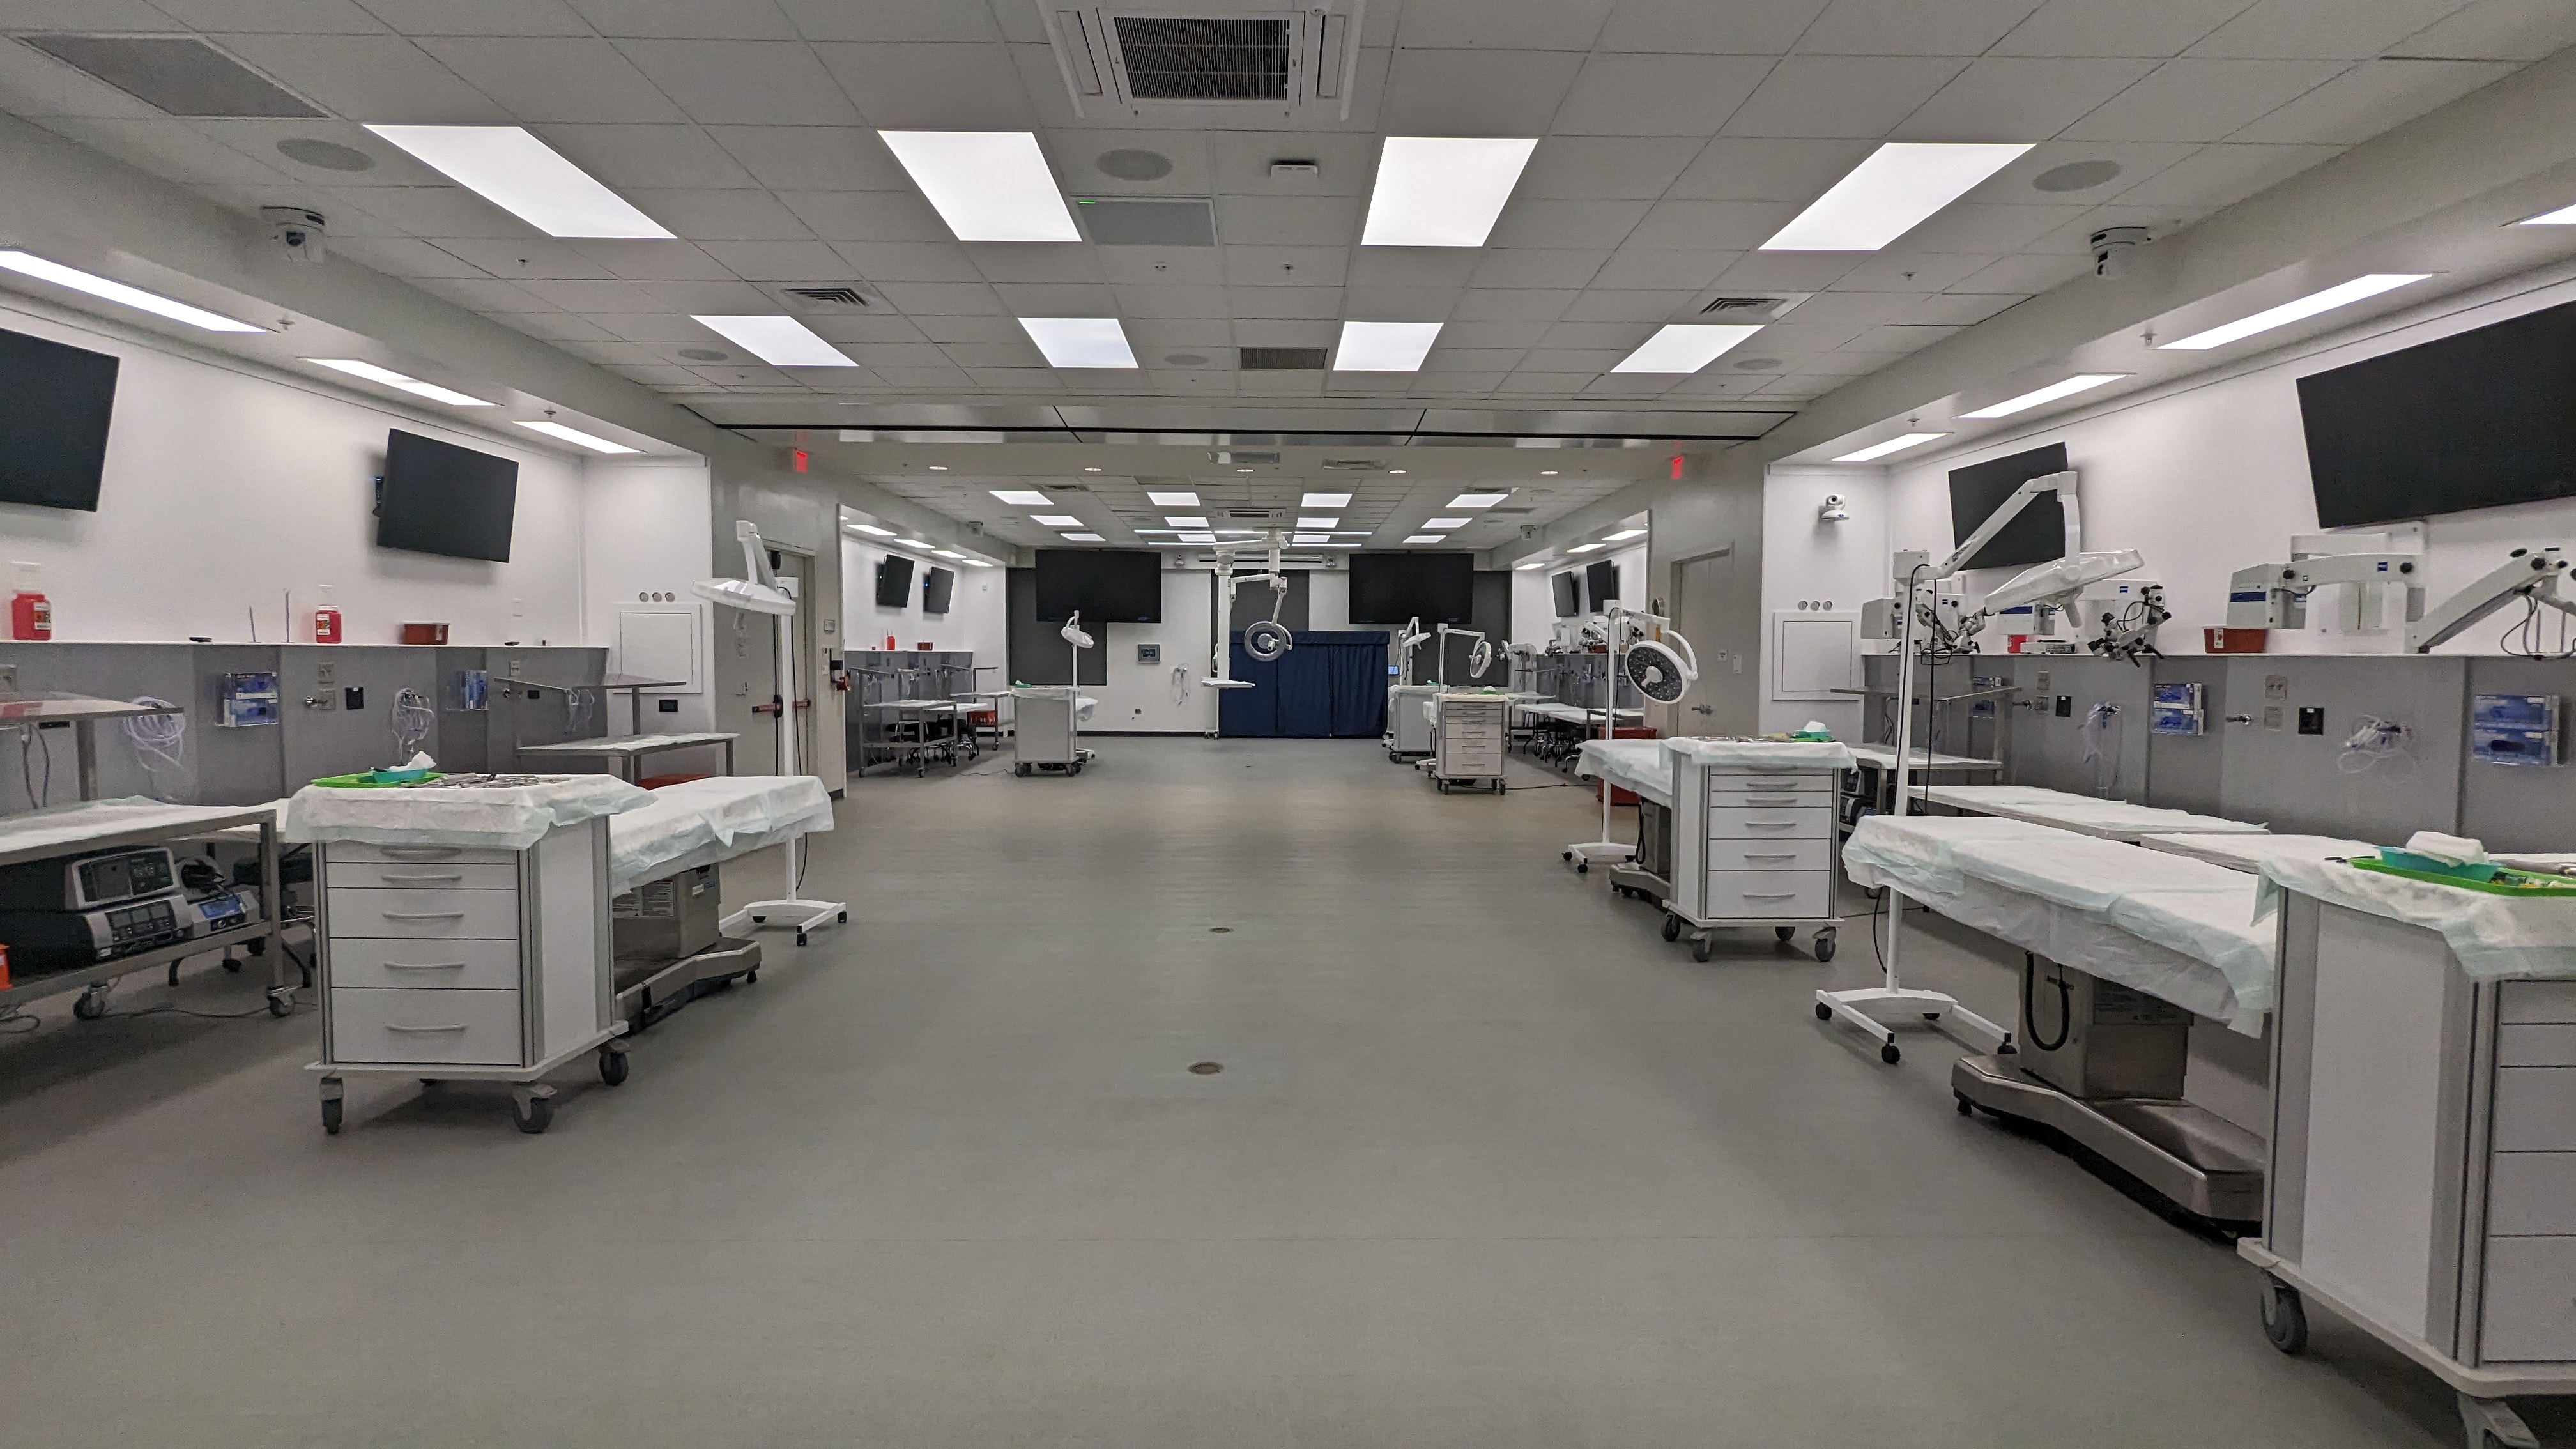 Labs 1 & 2 of the Johnson & Johnson Institute facility location in Palm Beach Gardens, FL